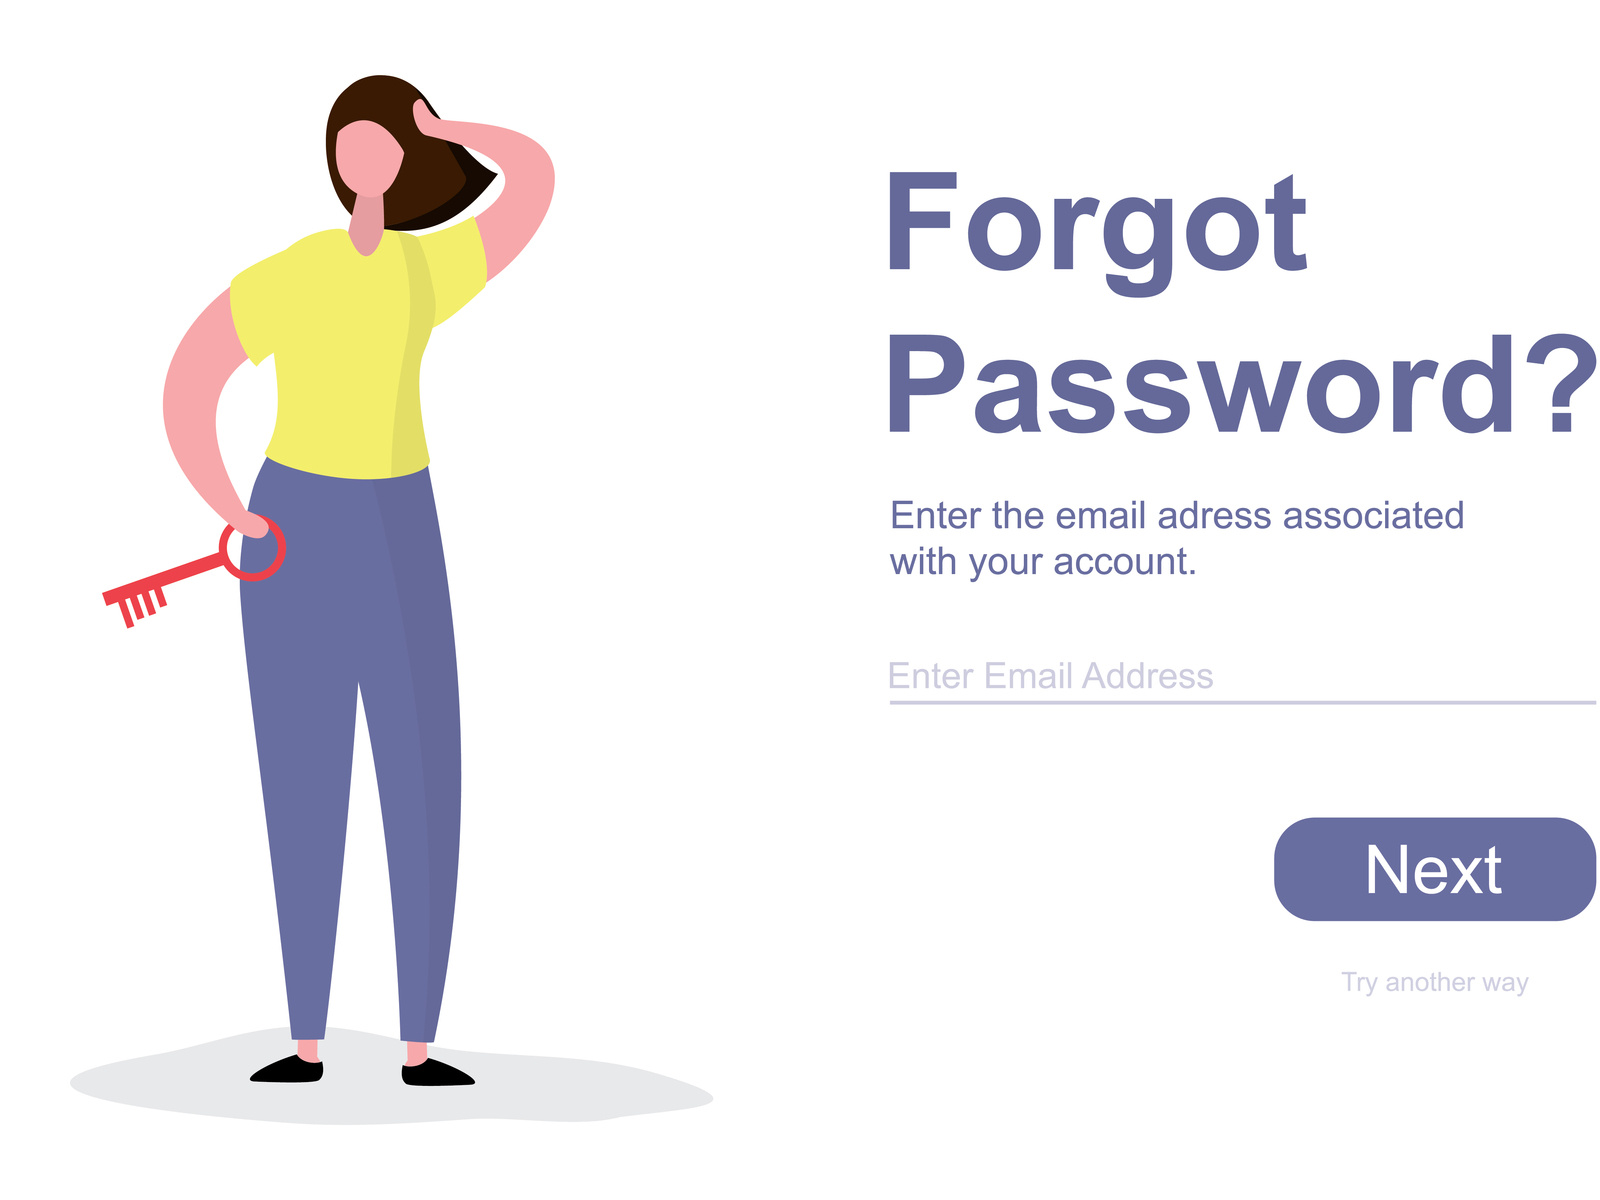 Forgot Password Web Page Template By Naumov Aleksei On Dribbble